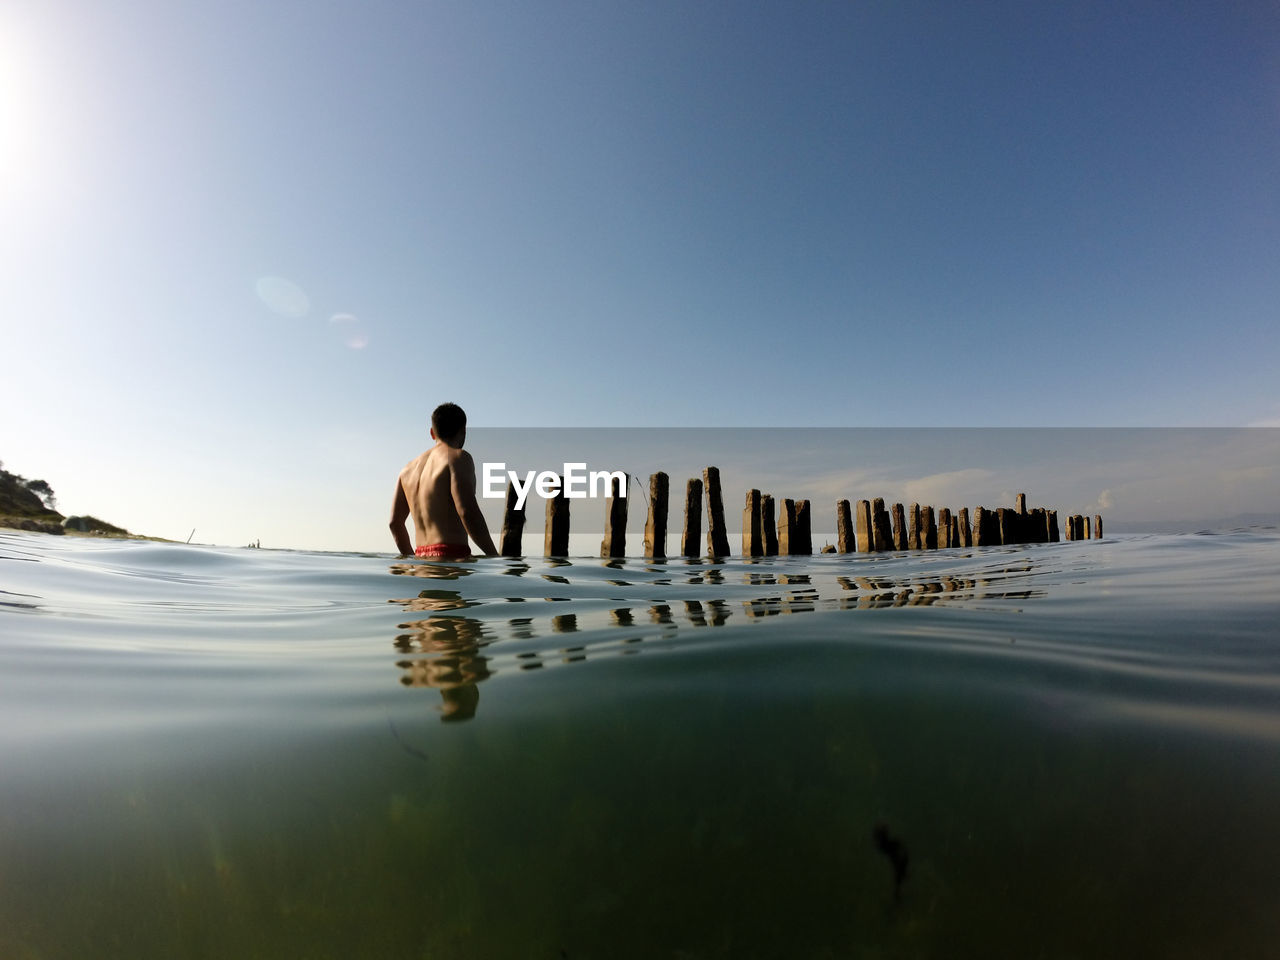 Water surface shot of shirtless man wading in sea against sky